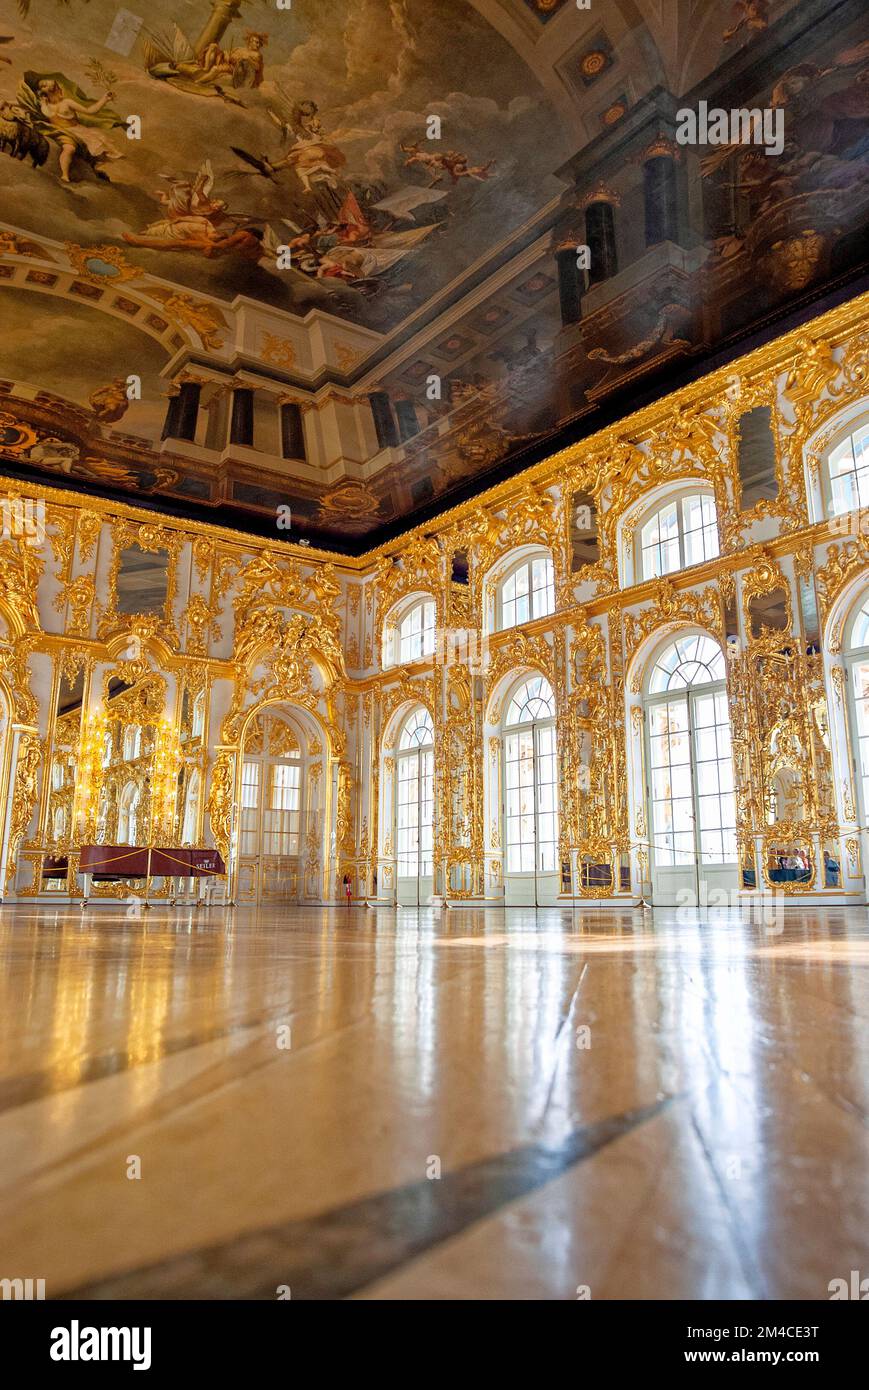 https://c8.alamy.com/comp/2M4CE3T/the-great-hall-of-the-catherine-palace-tsarskoye-selo-pushkin-st-petersburg-russia-24th-of-june-2011-2M4CE3T.jpg